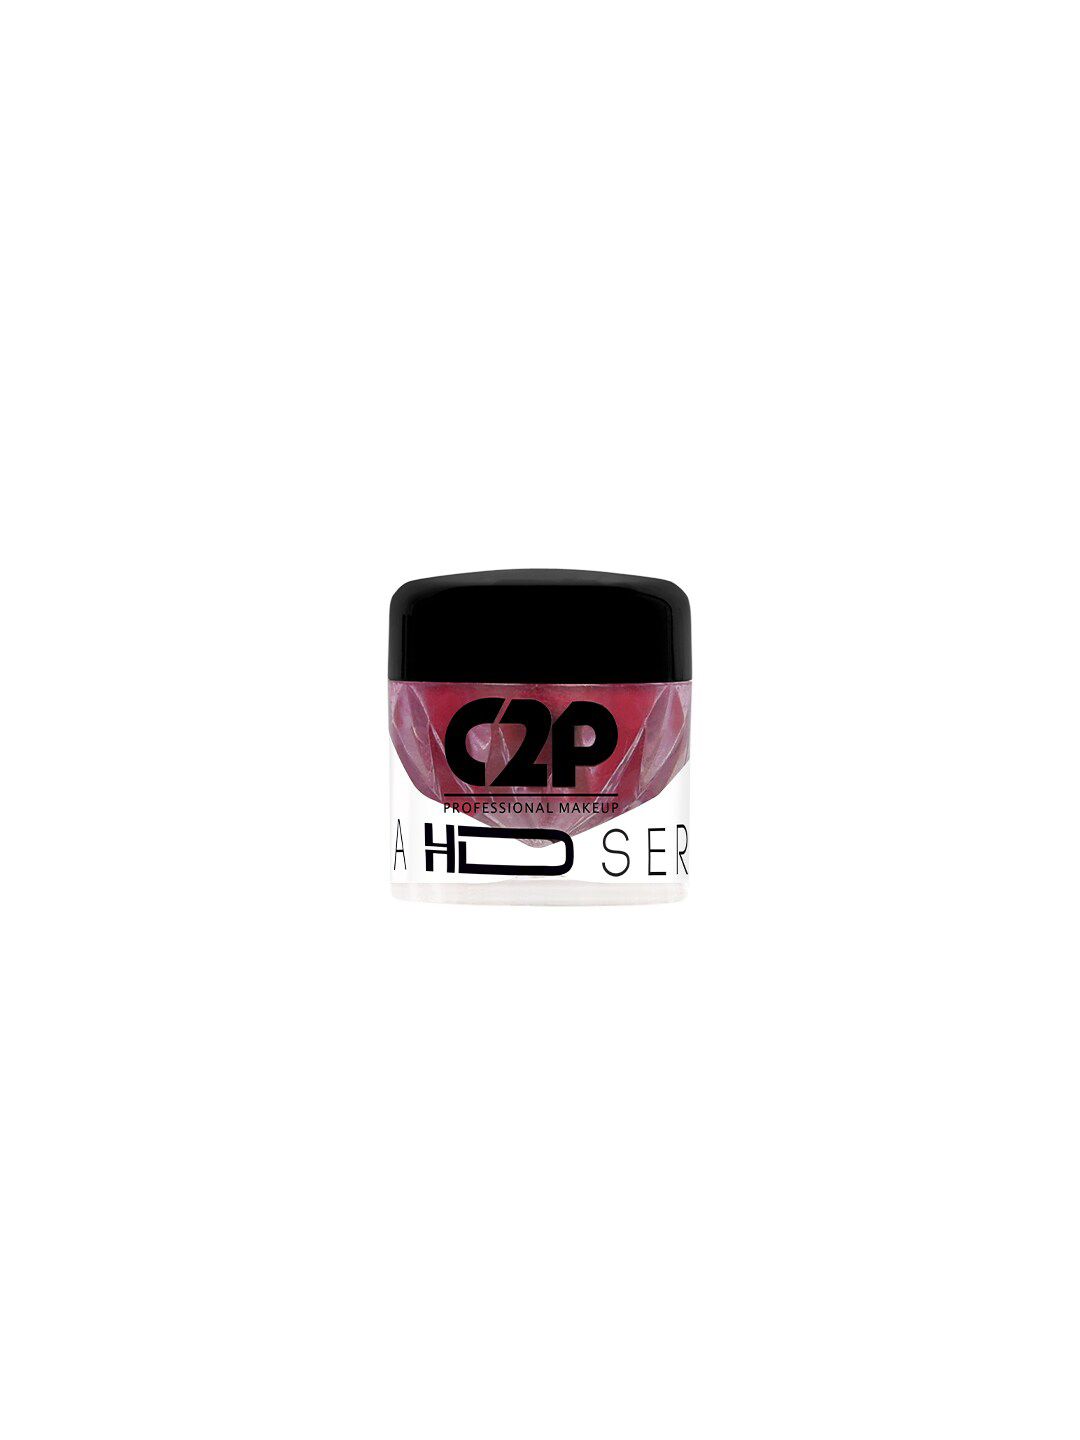 C2P PROFESSIONAL MAKEUP HD Loose Precious Pigments Eyeshadow - Misty 87 Price in India